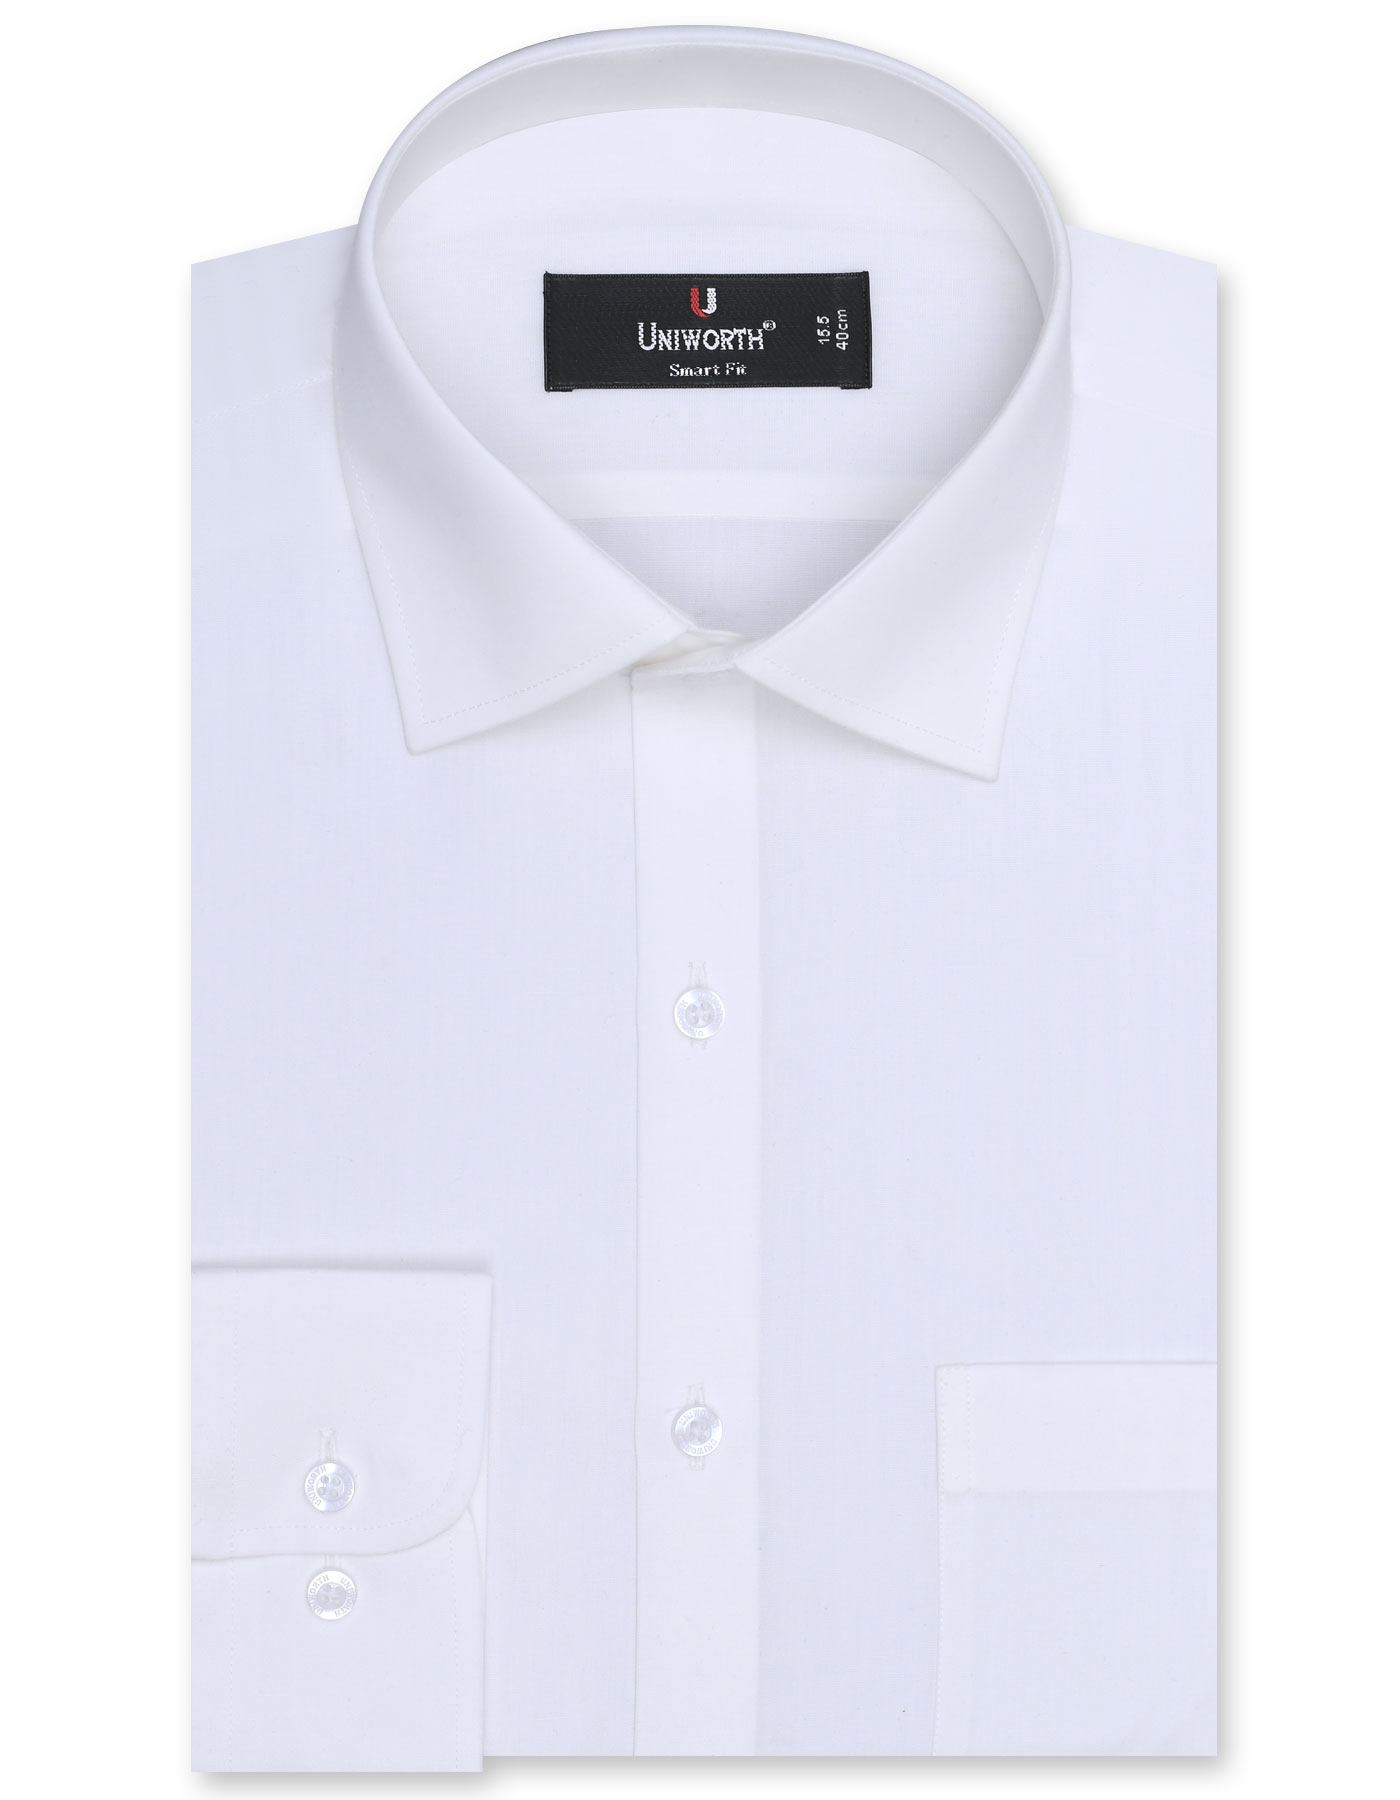 Buy Best Cotton Check Shirts for Men Online | The Formal Club